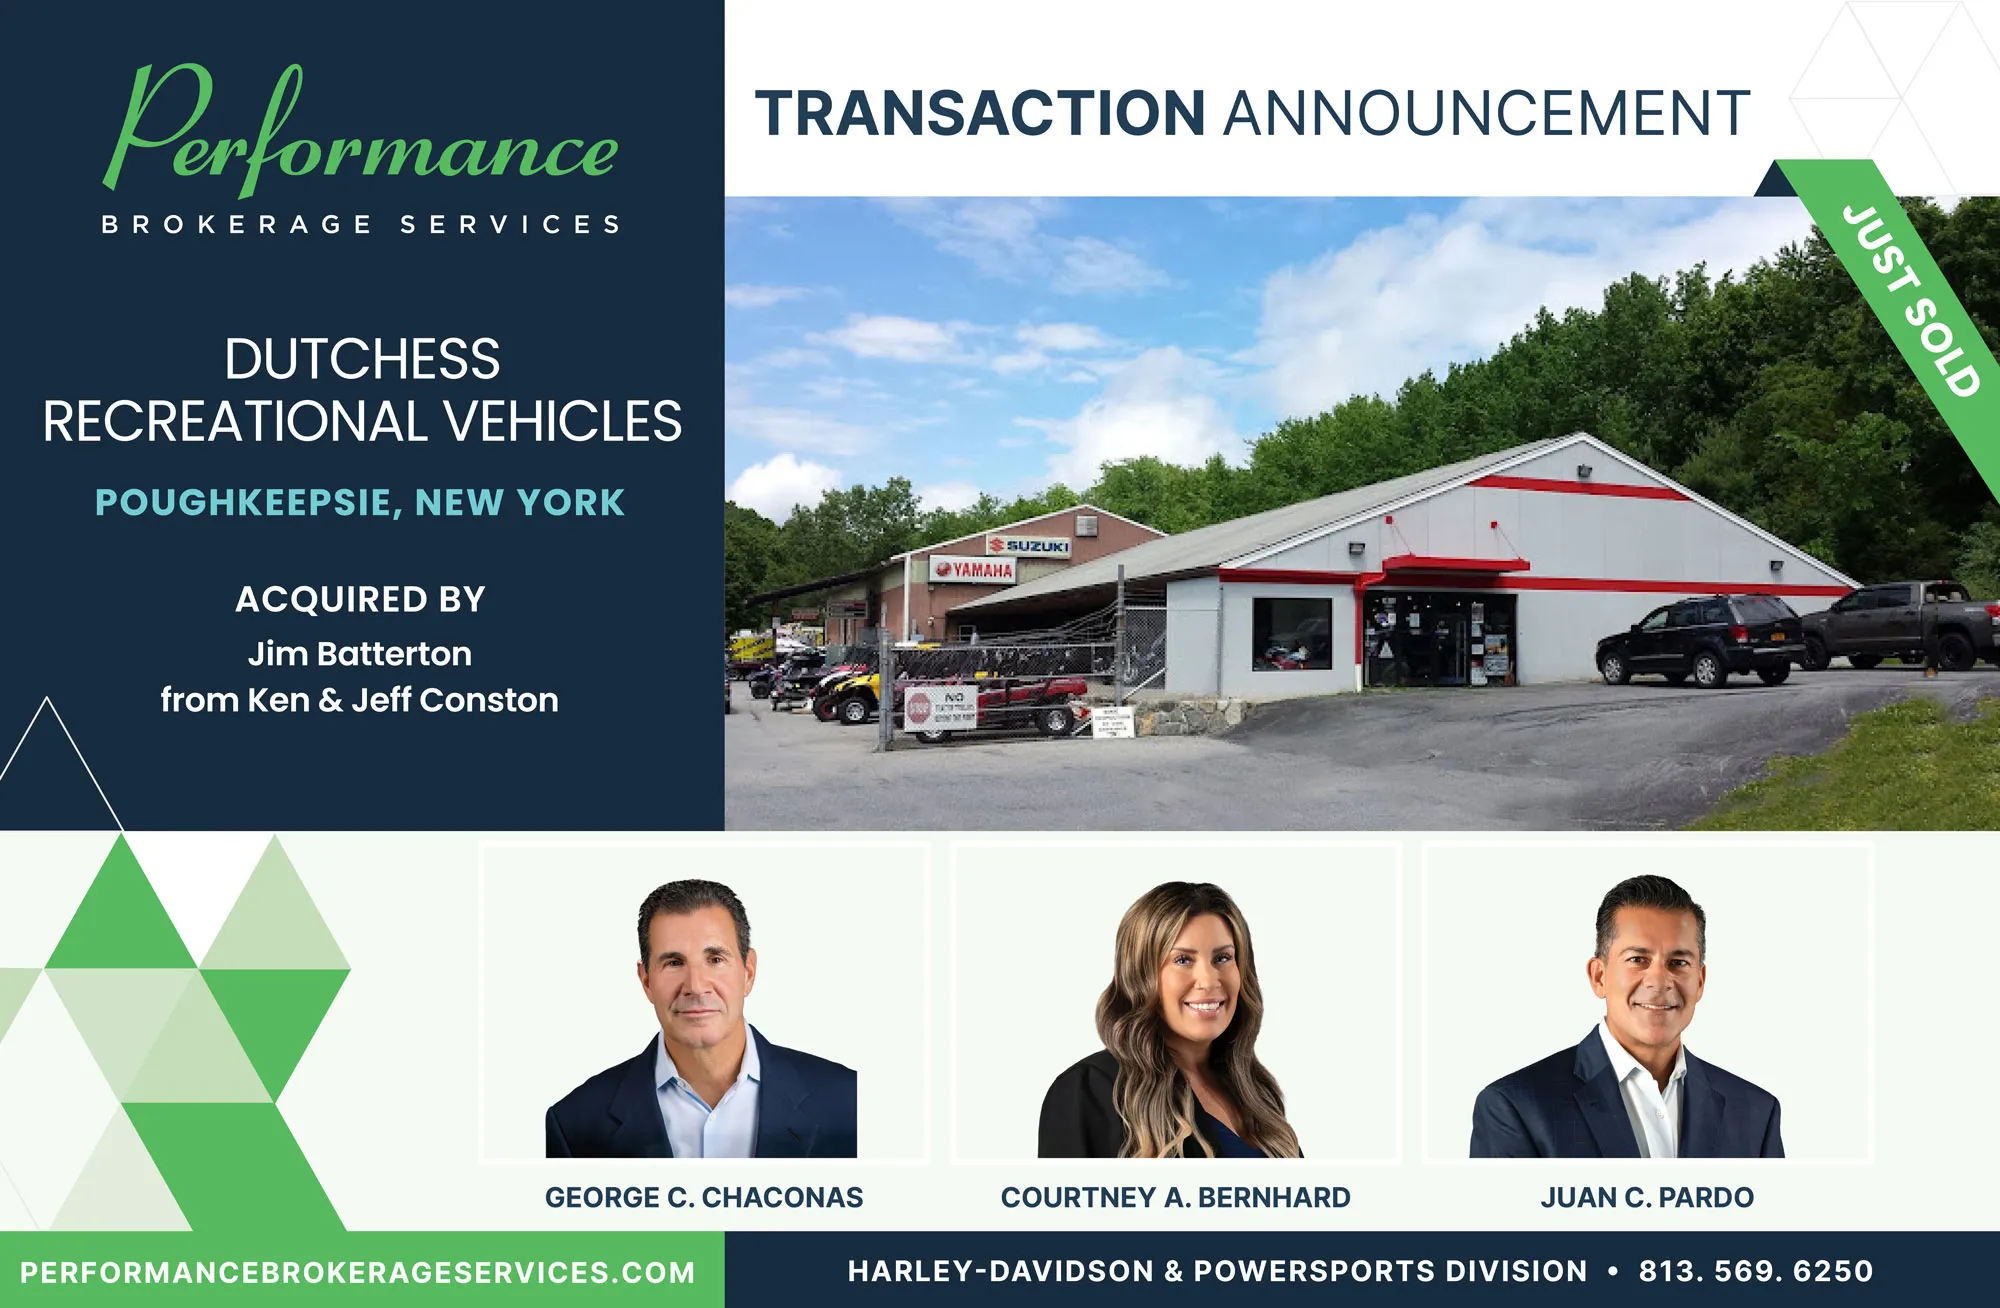 Dutchess Recreational Vehicles sells to Jim Batterton from Performance Brokerage Services